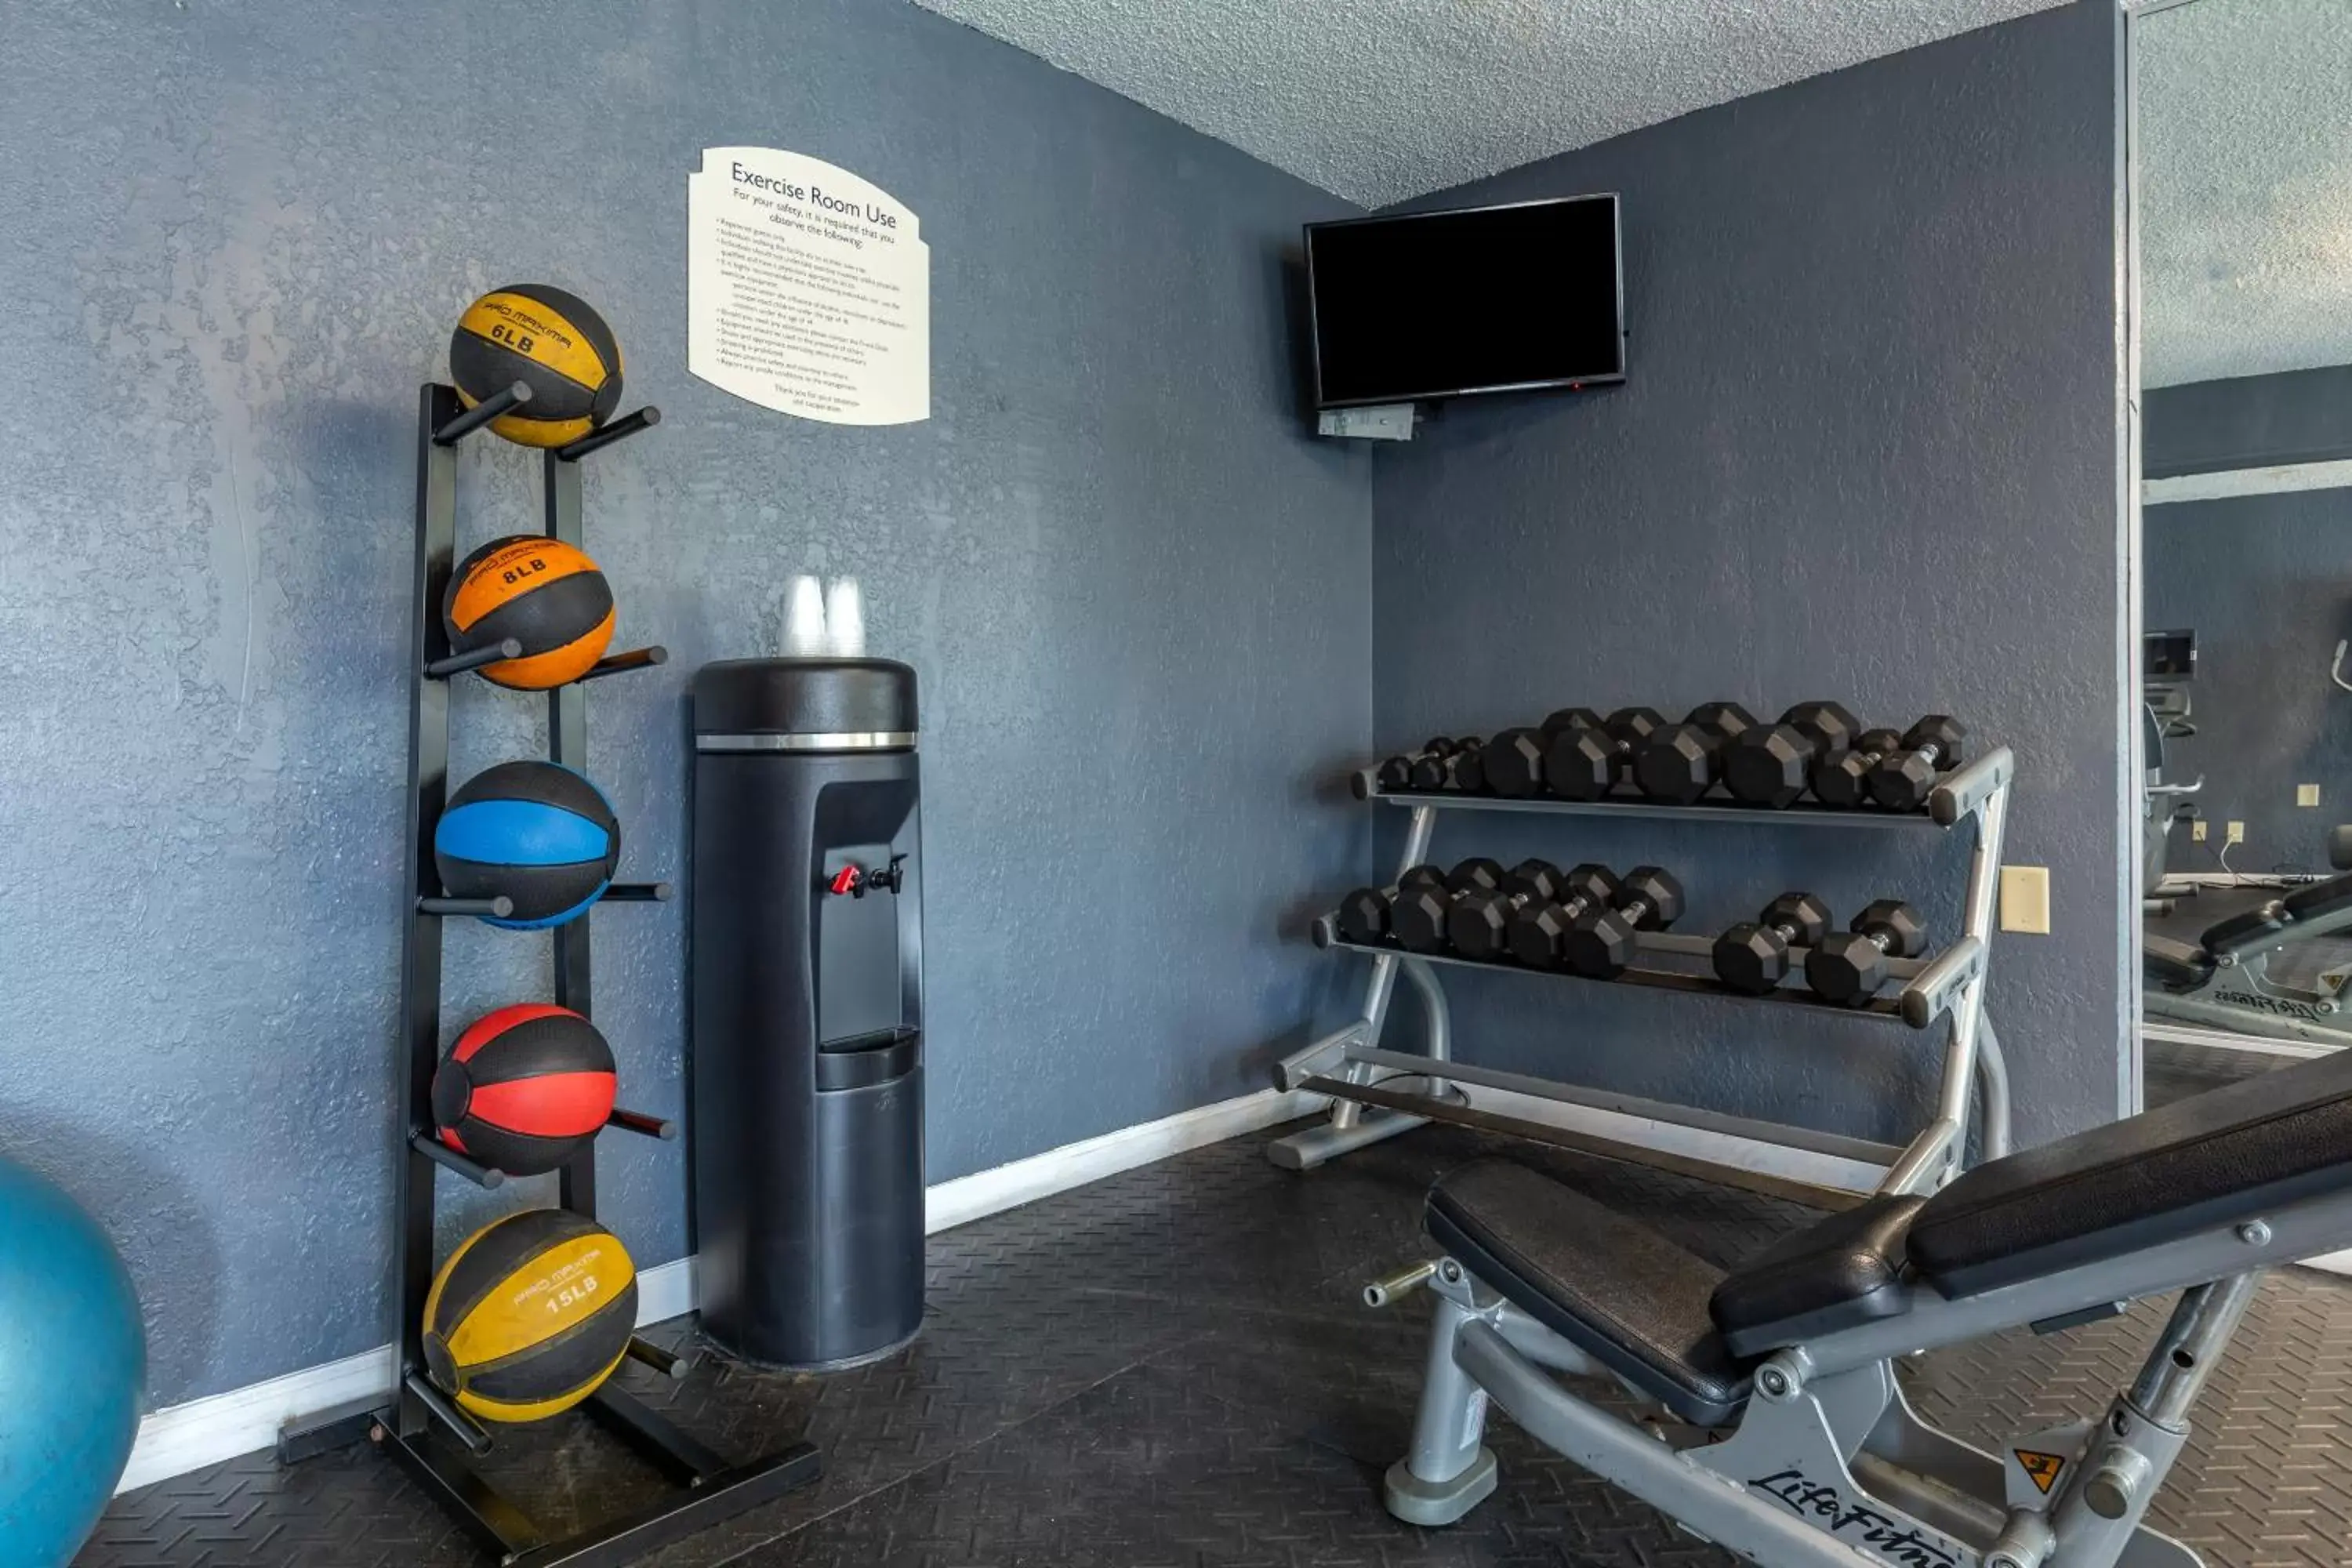 Fitness centre/facilities, Fitness Center/Facilities in Quality Inn Near Fort Liberty formerly Ft Bragg